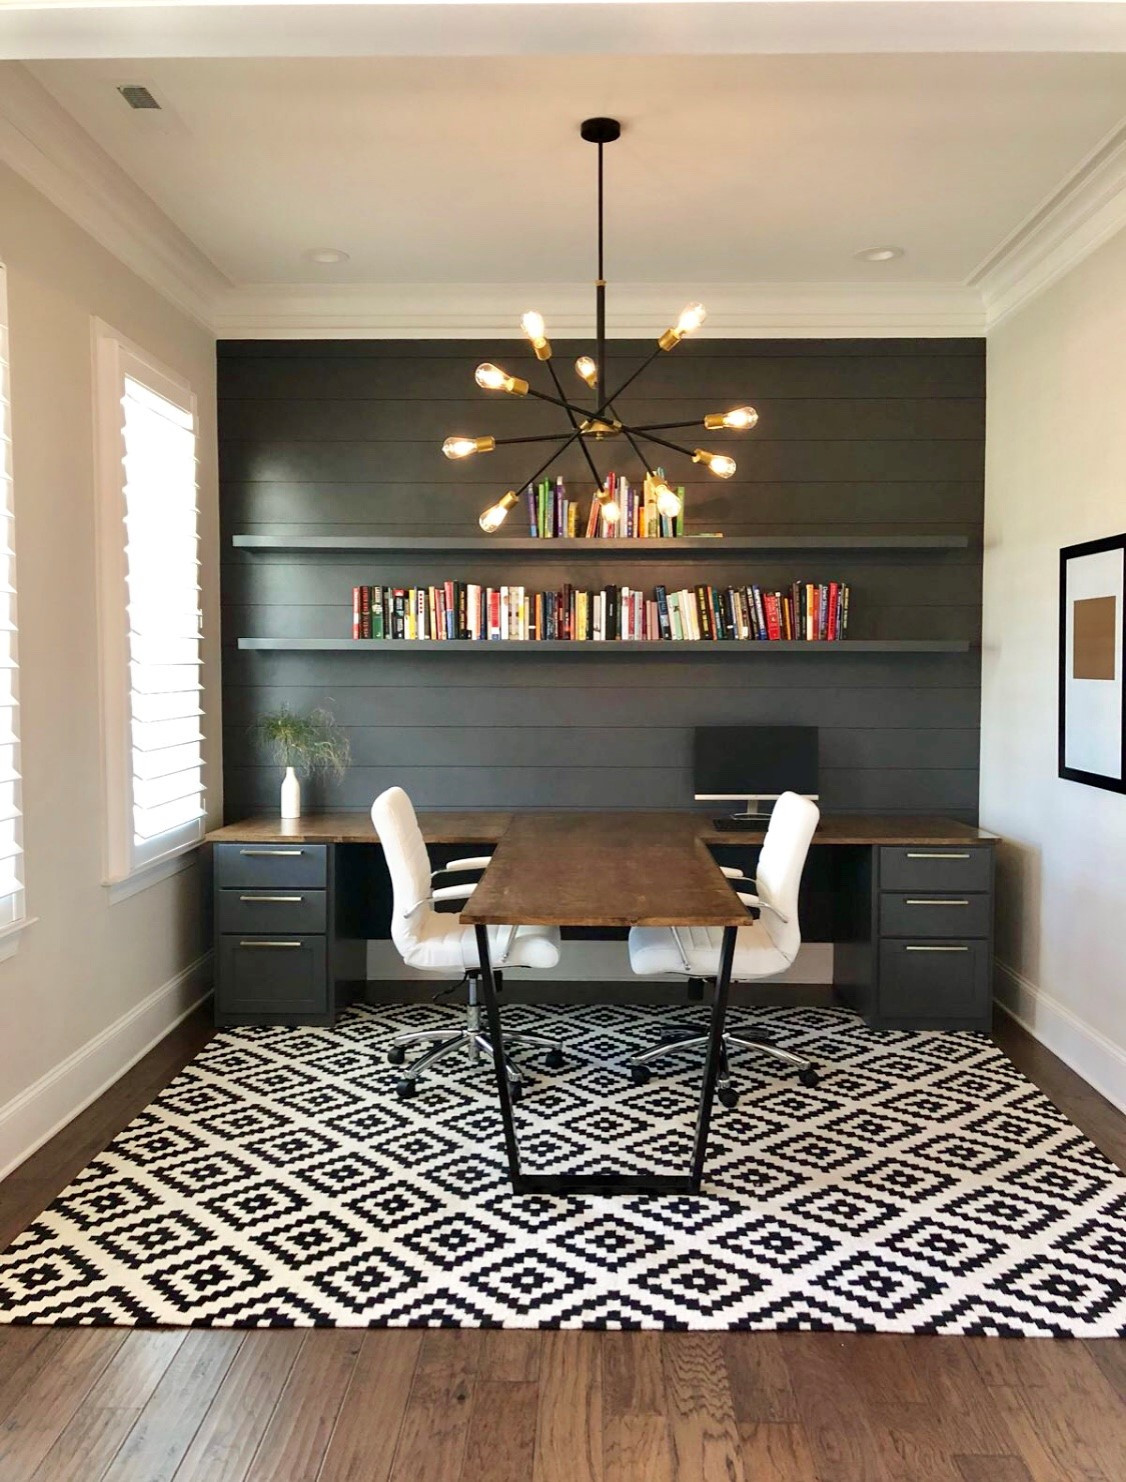 18 Beautiful Home Office Pictures Ideas October 2020 Houzz,Sold Design Lab Jeans